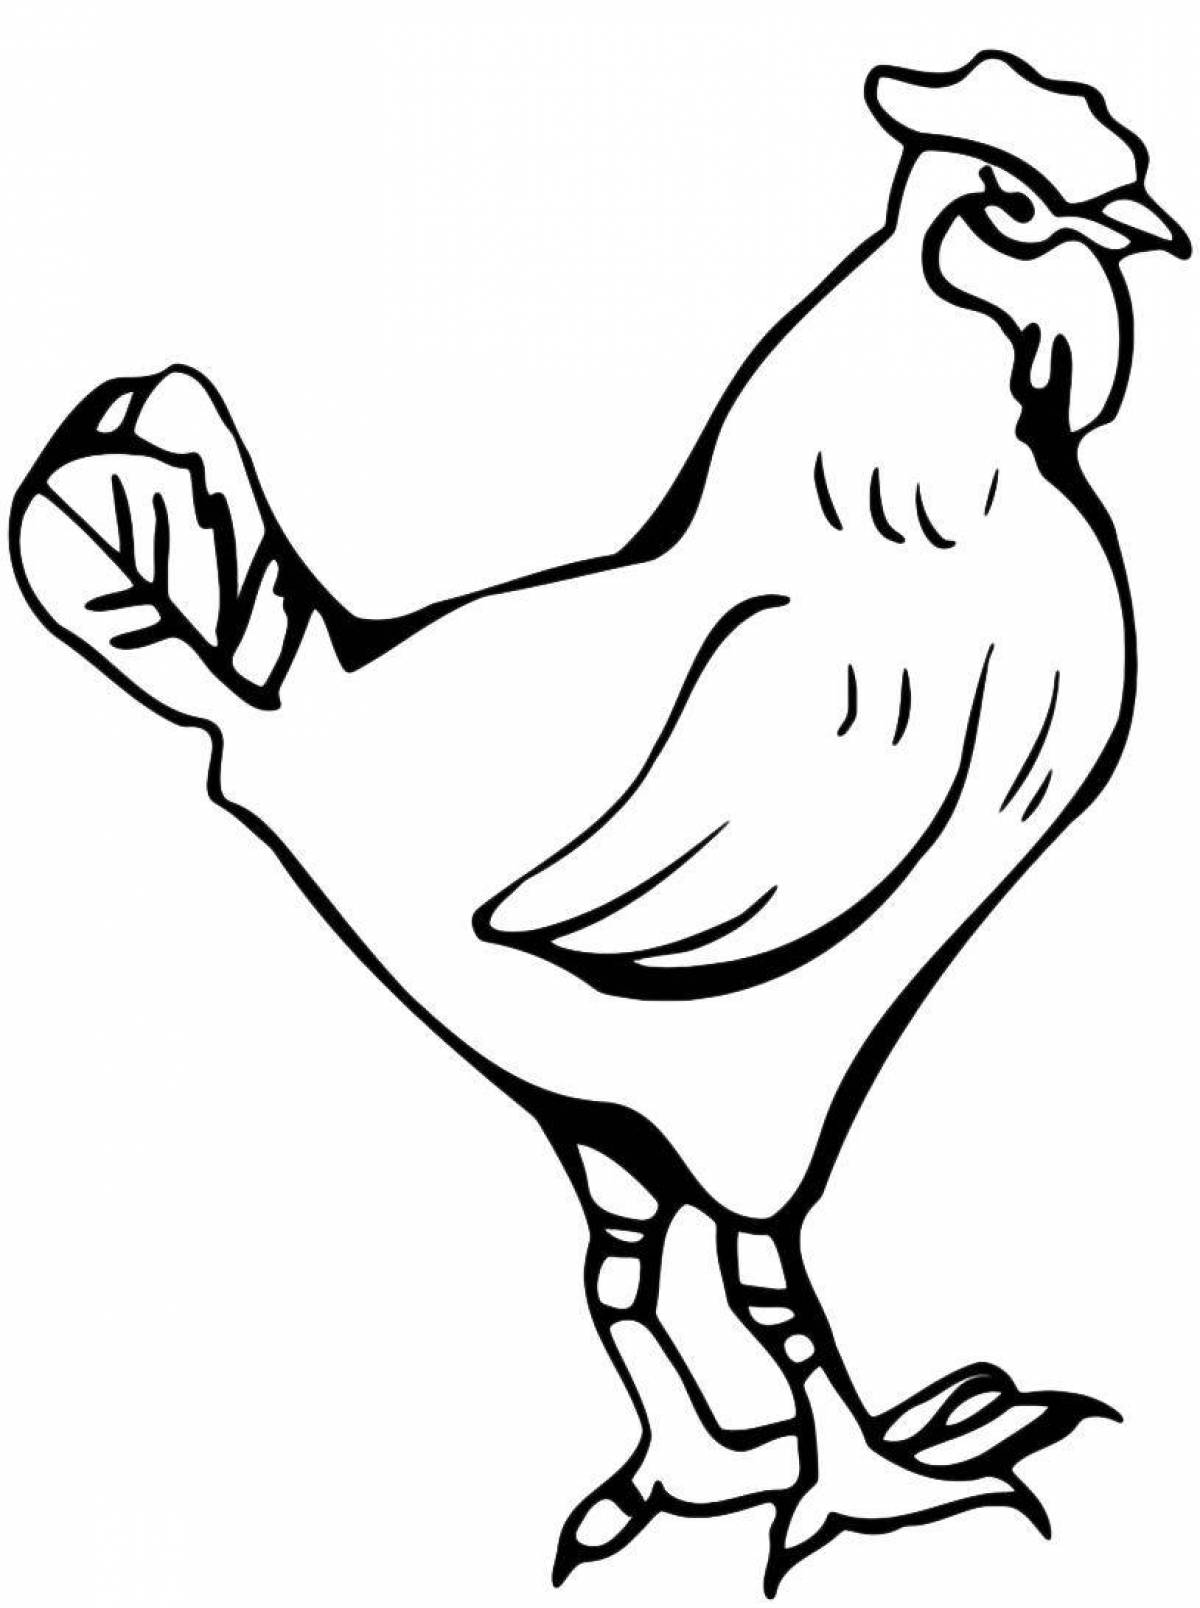 Amazing black chicken coloring page